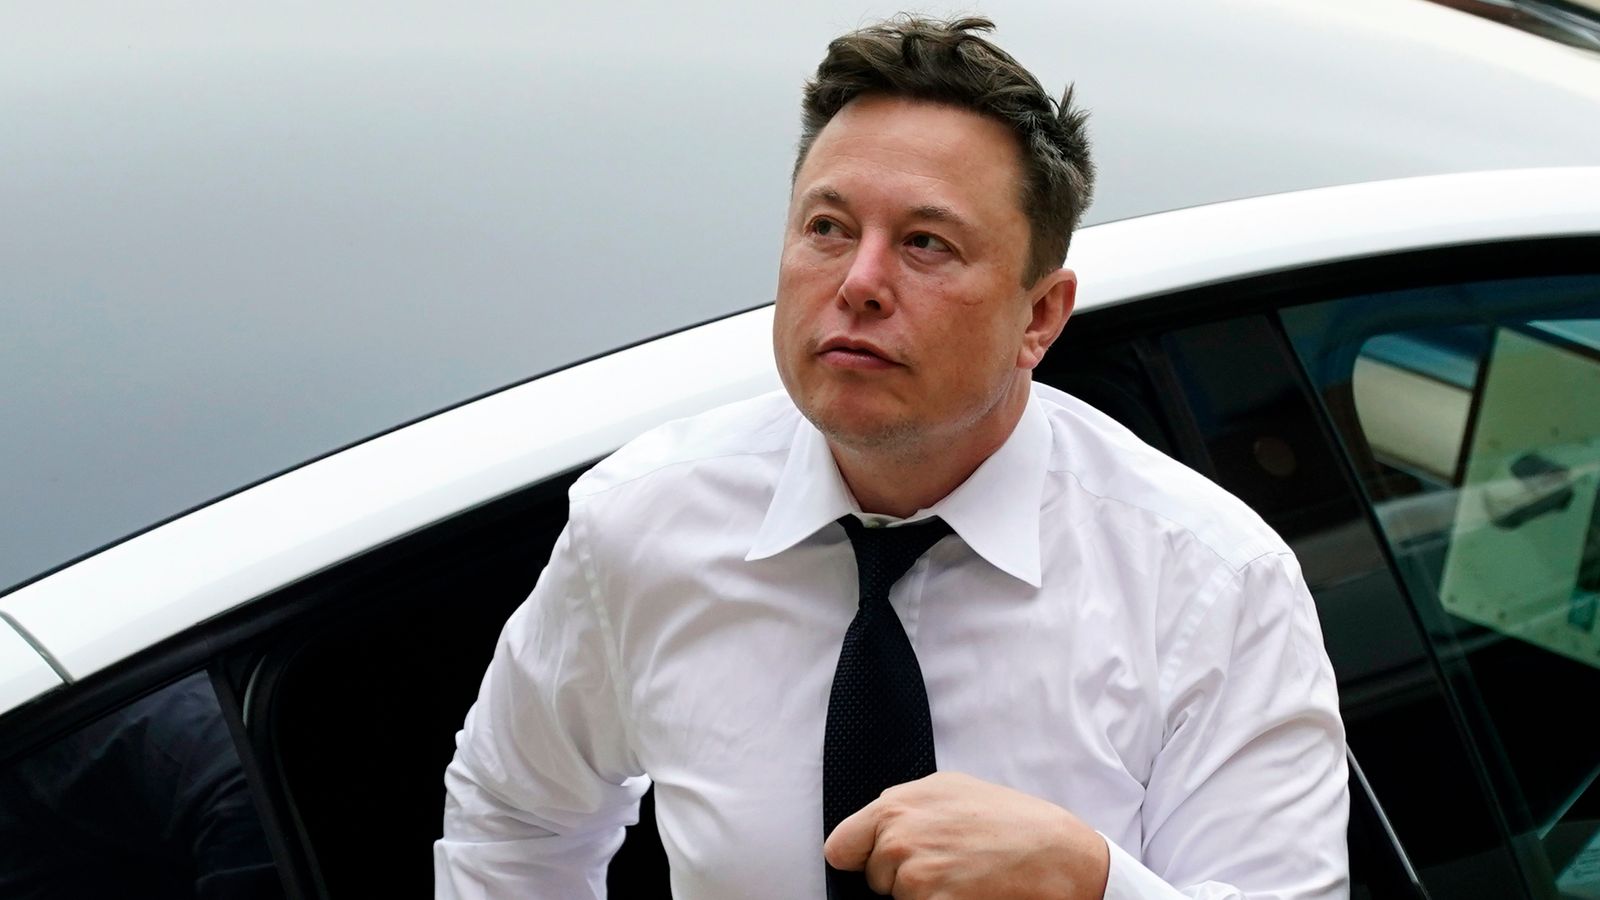 Elon Musk says he will not sell more Tesla stock for two years